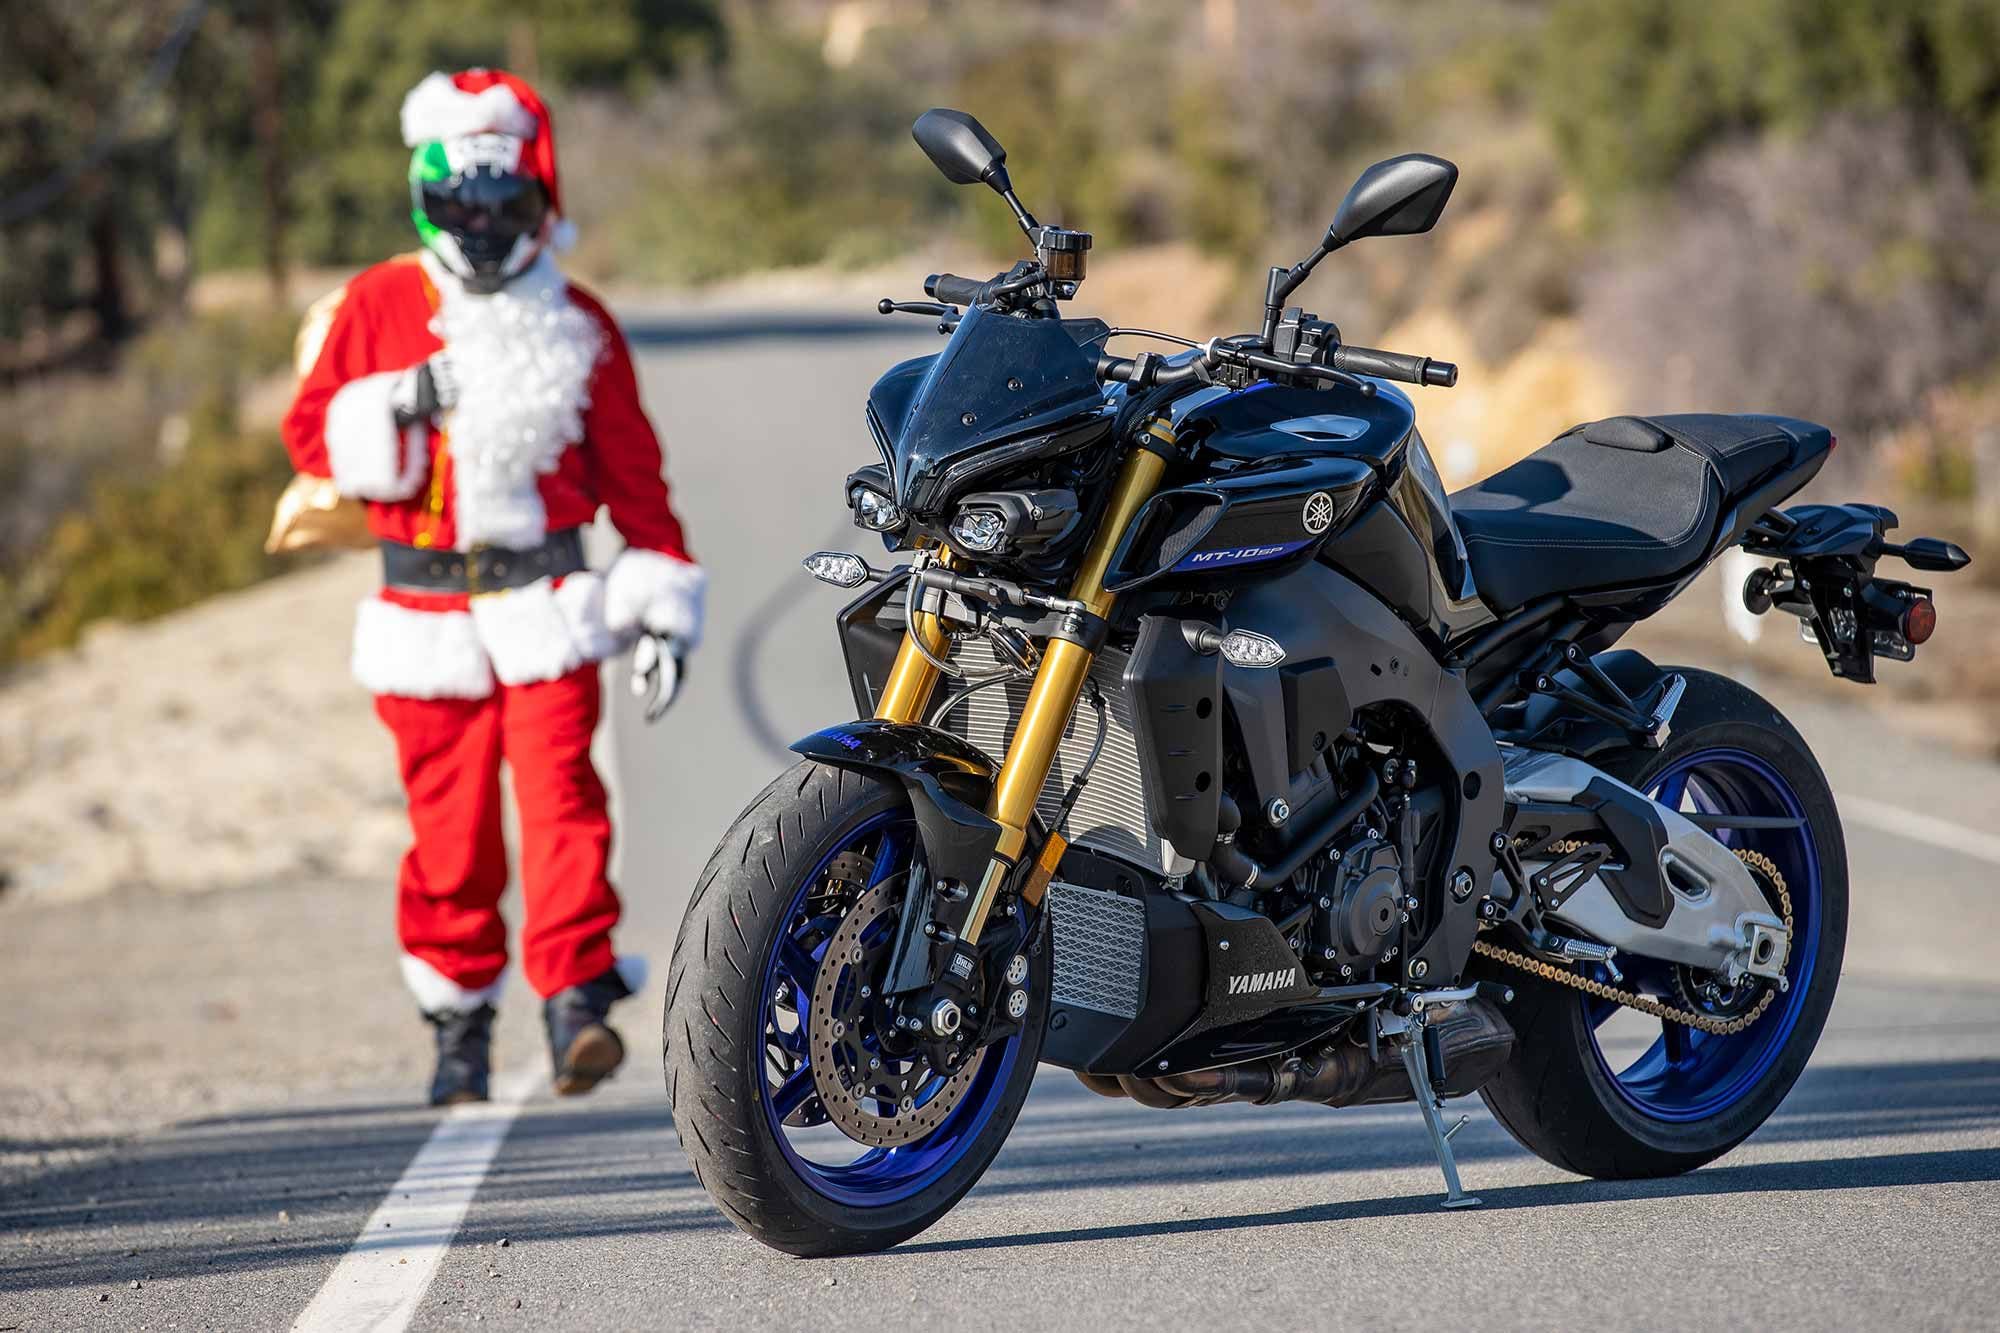 With its European-esque looks and premium gold suspension, the MT-10 SP was an ideal fit for Santa’s delivery run this holiday season.